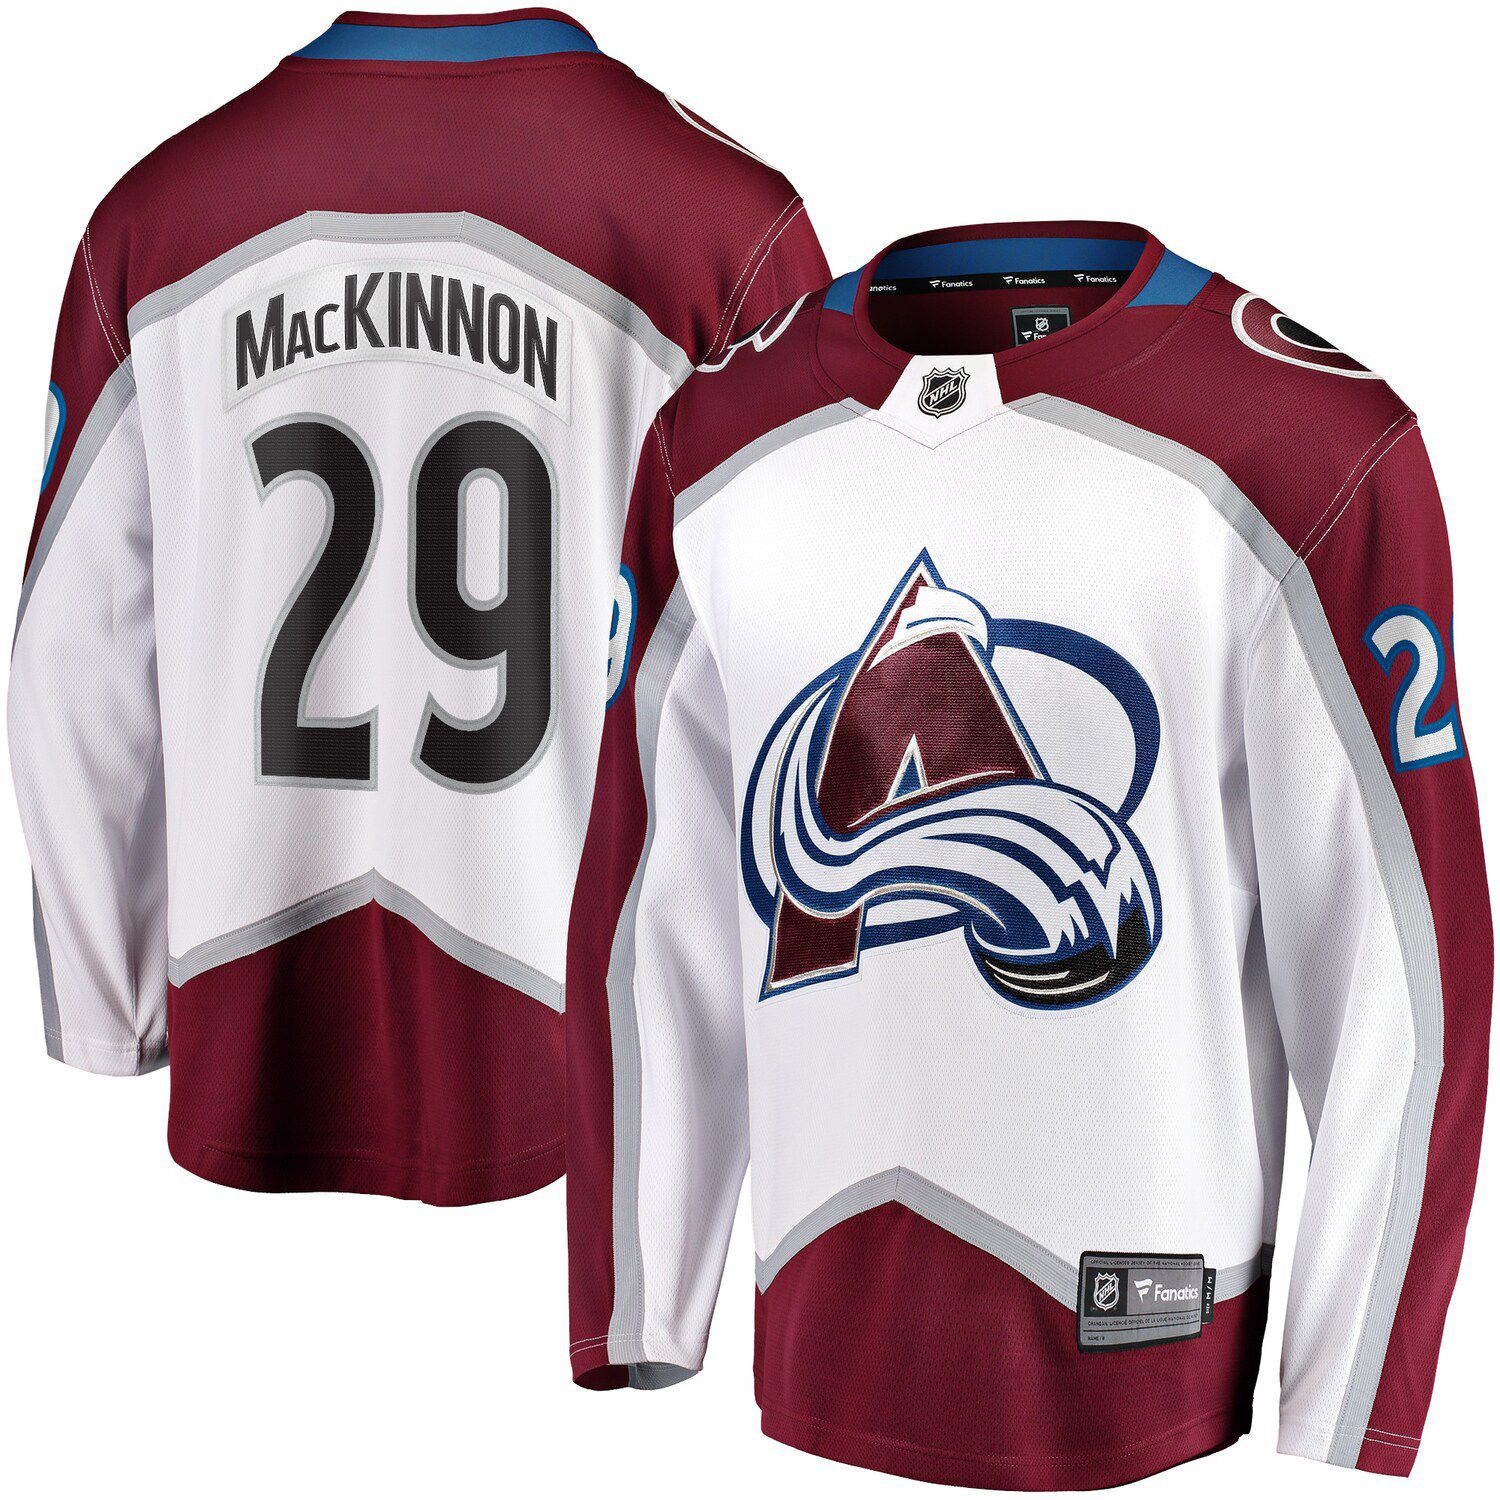 Outerstuff Youth Cale Makar Navy Colorado Avalanche Replica Player Jersey Size: Small/Medium